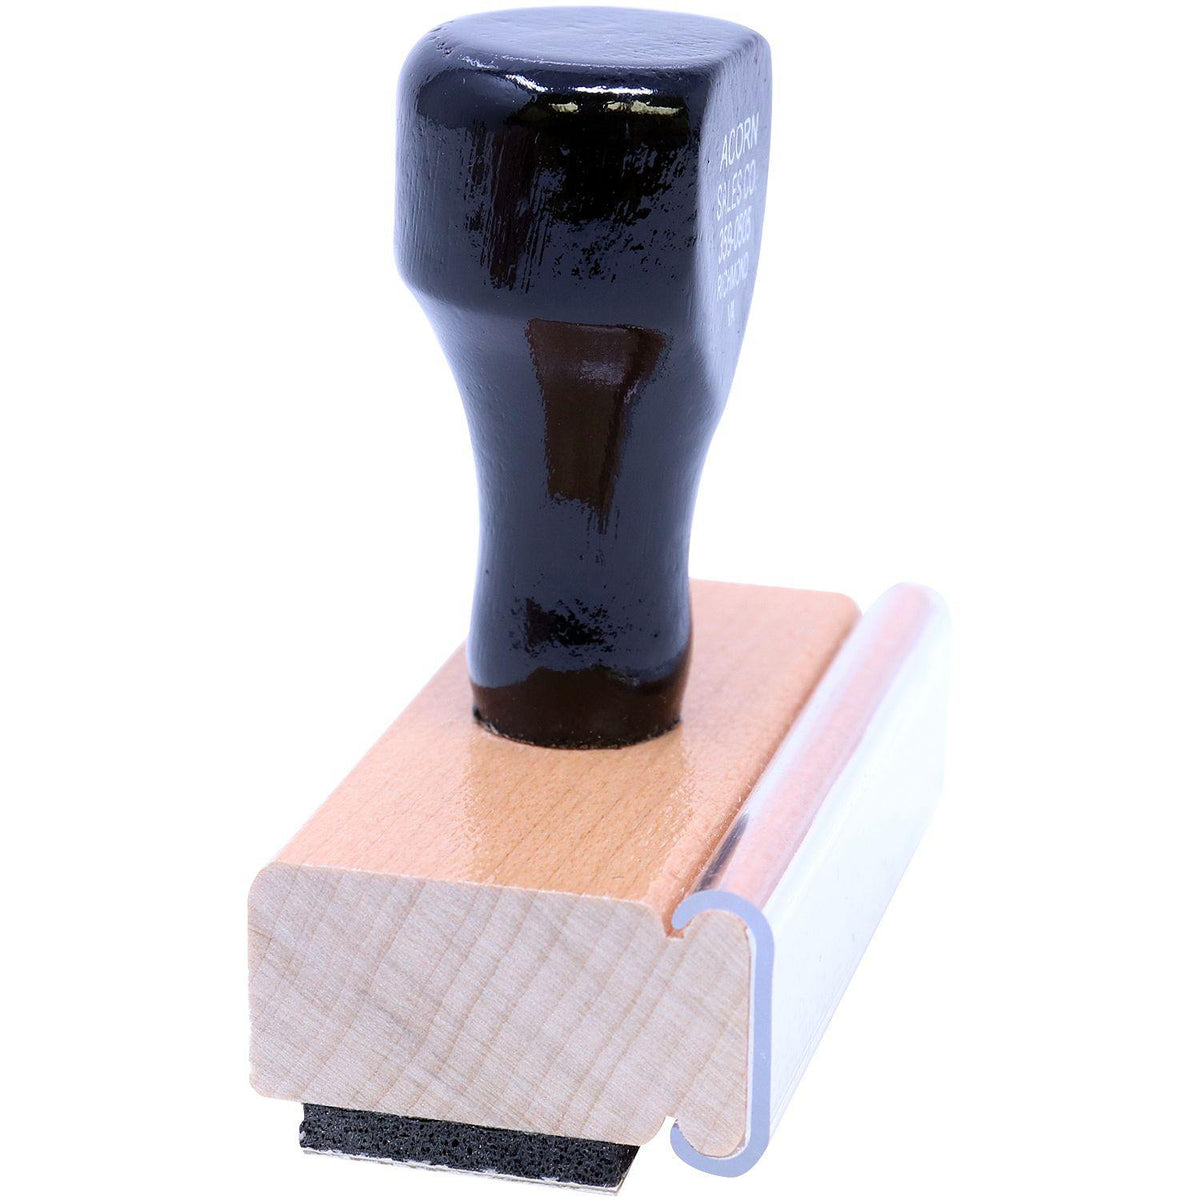 Side View of Large Non-Smoker Rubber Stamp at an Angle